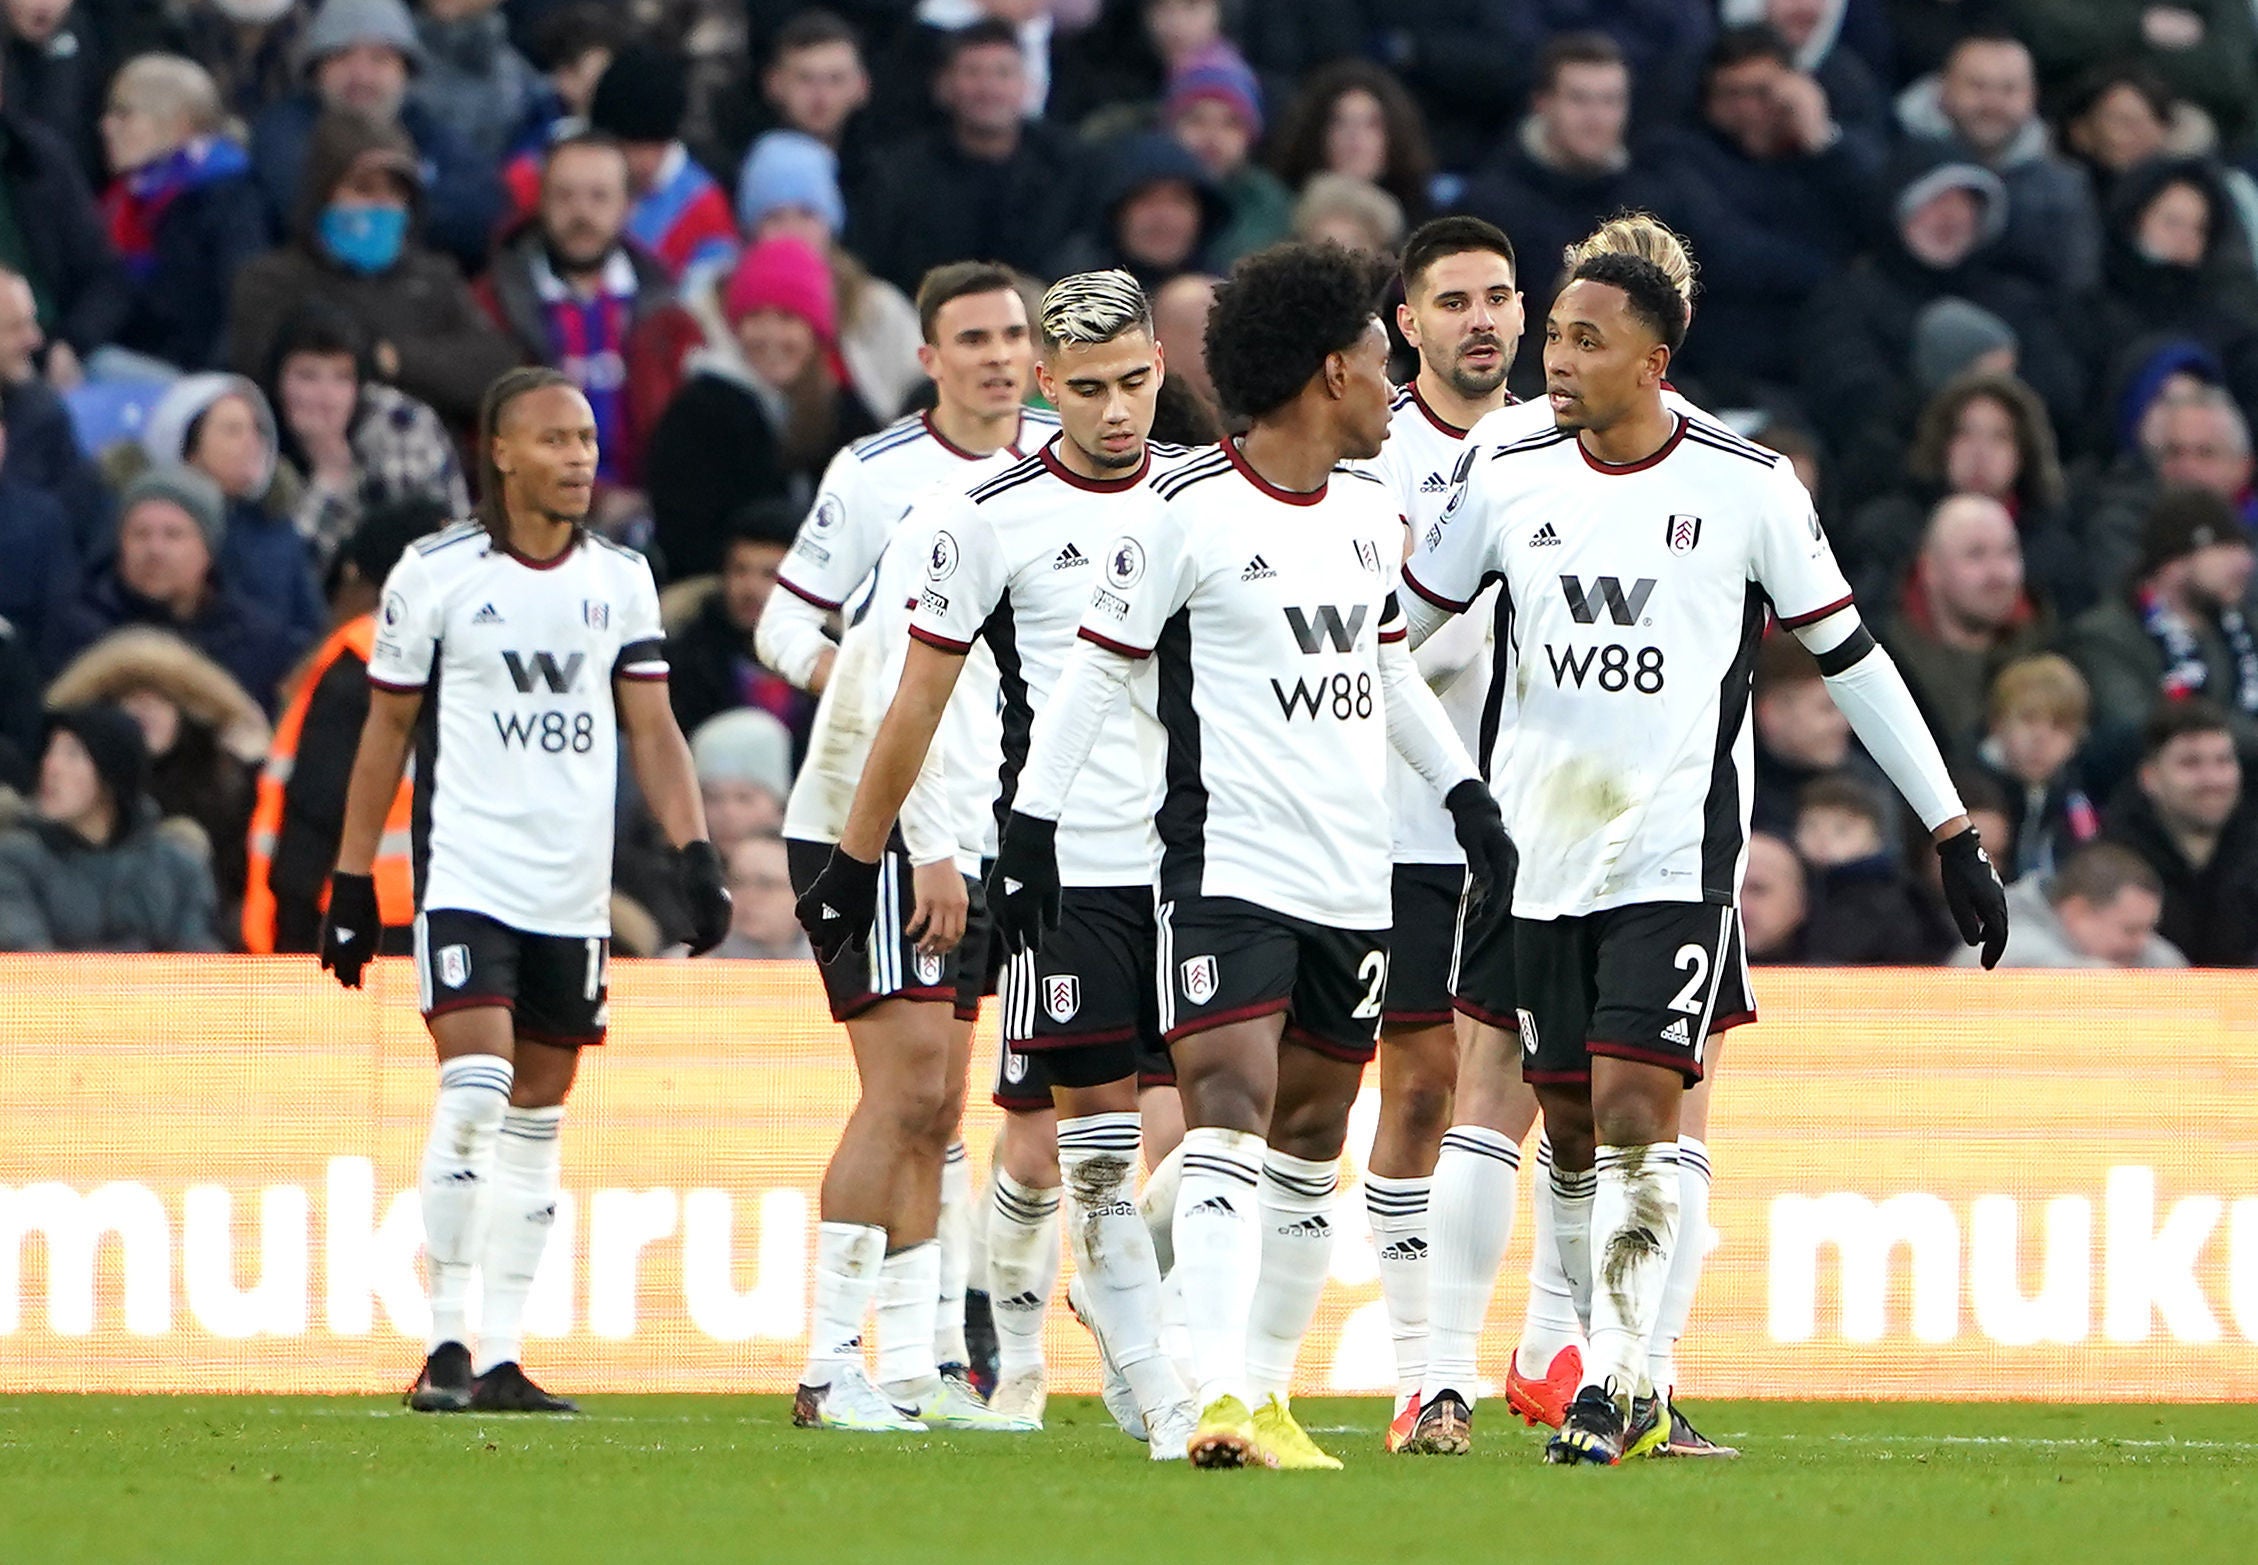 Fulham players after scoring against Crystal Palace